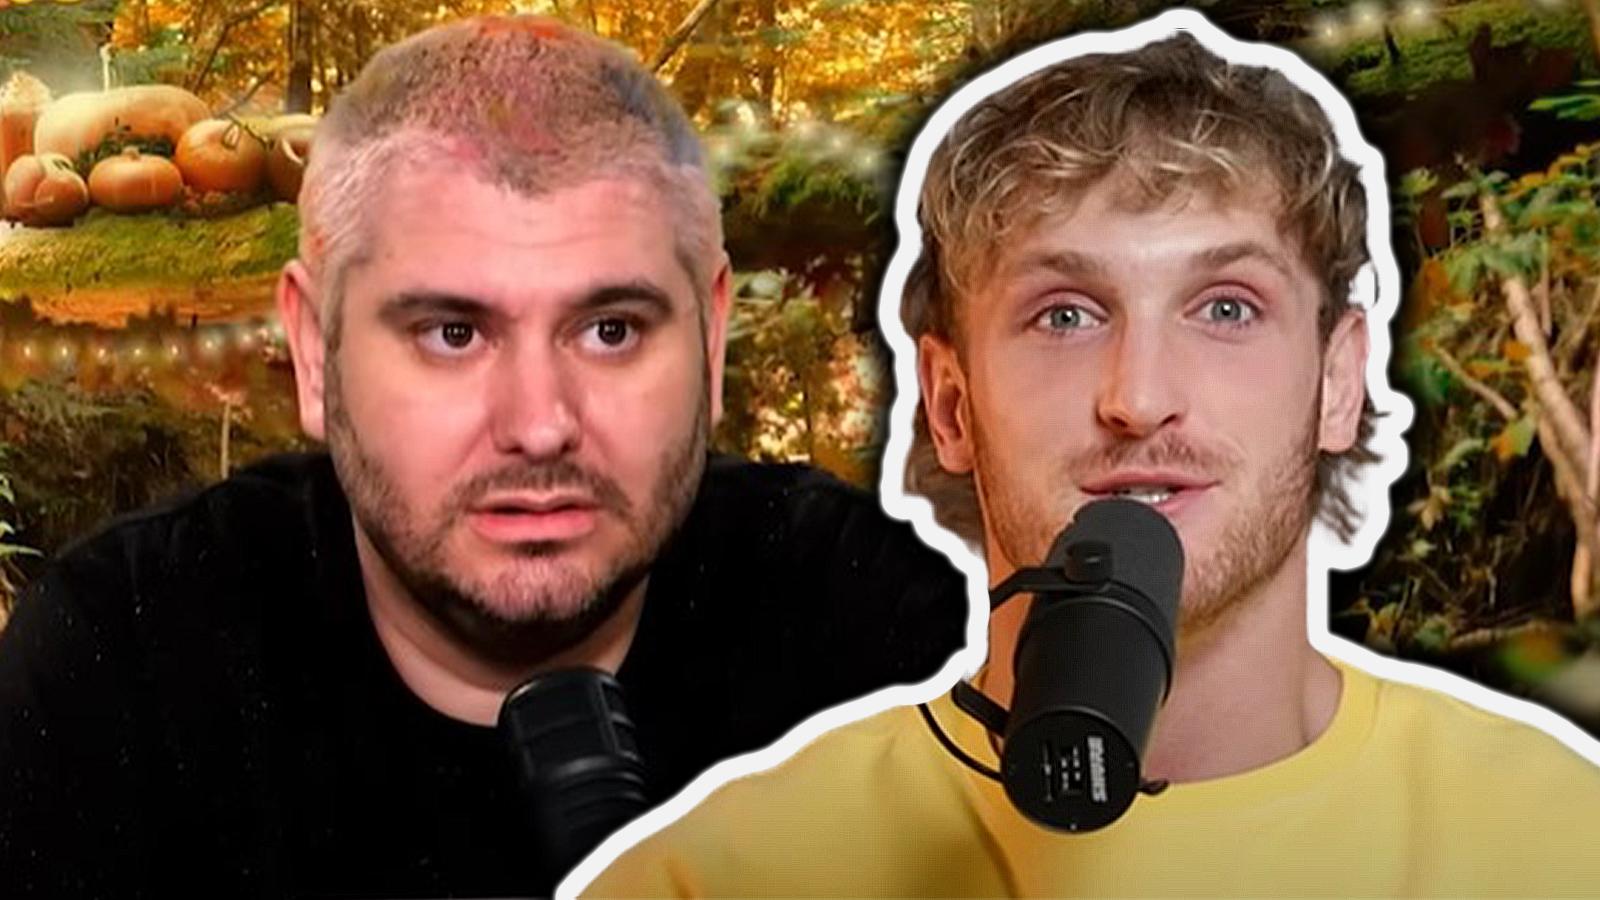 Ethan Klein challenges Logan Paul to sue him for defamation